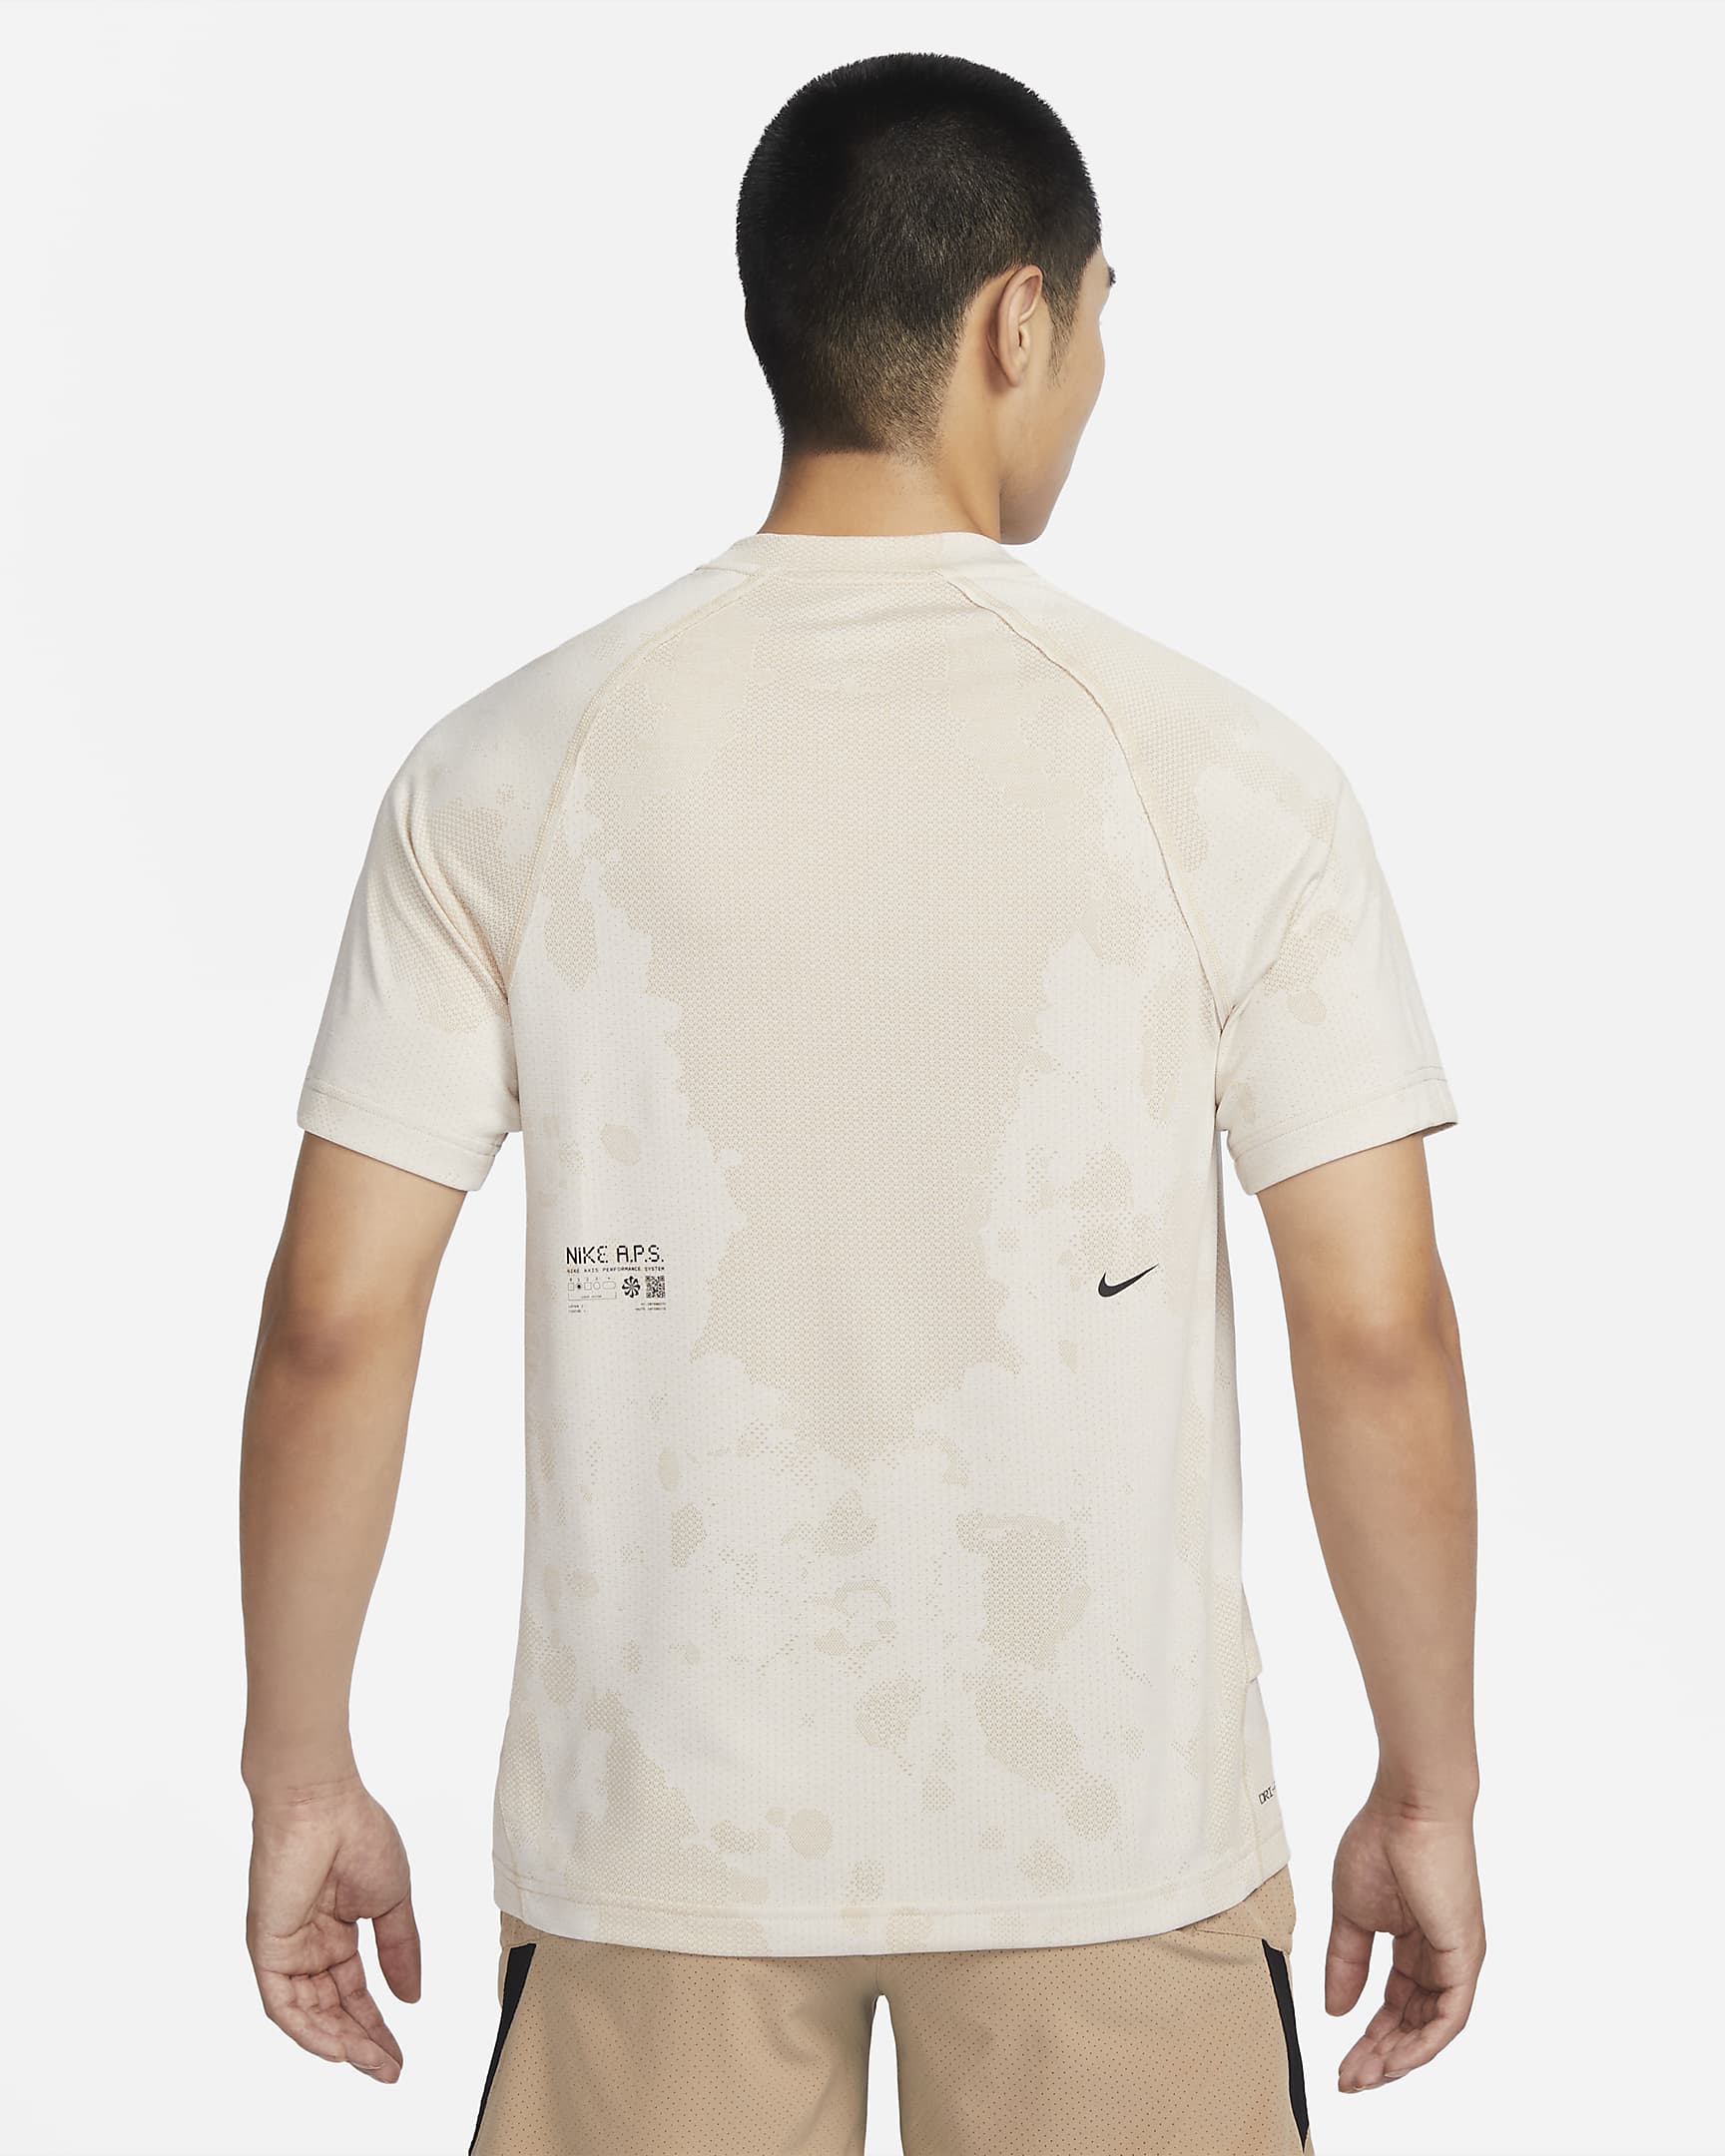 Nike Dri-FIT ADV A.P.S. Men's Engineered Short-Sleeve Fitness Top. Nike IN